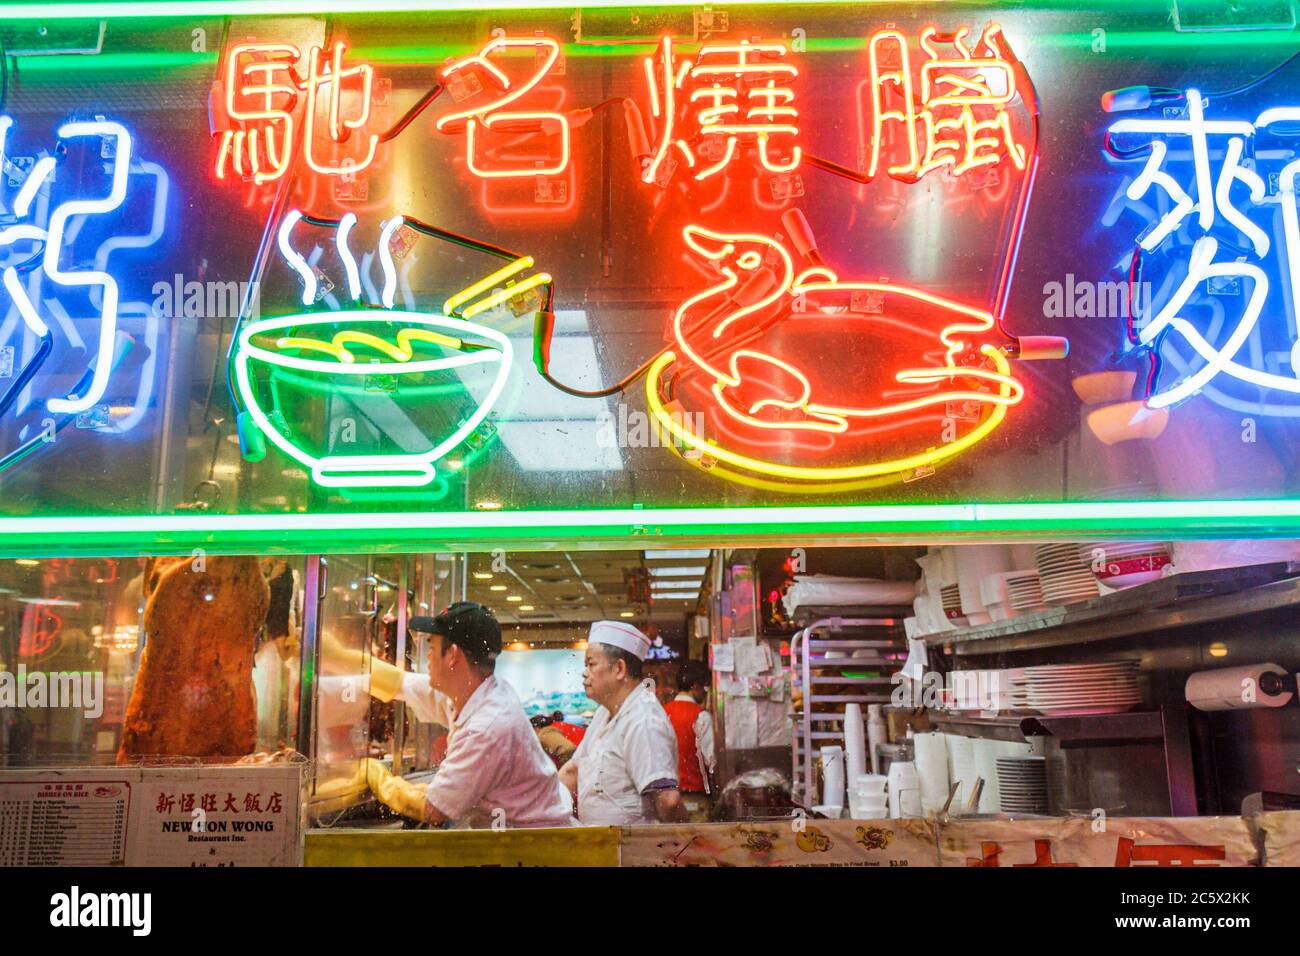 New York City,NYC NY Lower,Manhattan,Chinatown,Canal Street,restaurant restaurants food dining cafe cafes,neon light,sign,Chinese characters,Peking du Stock Photo